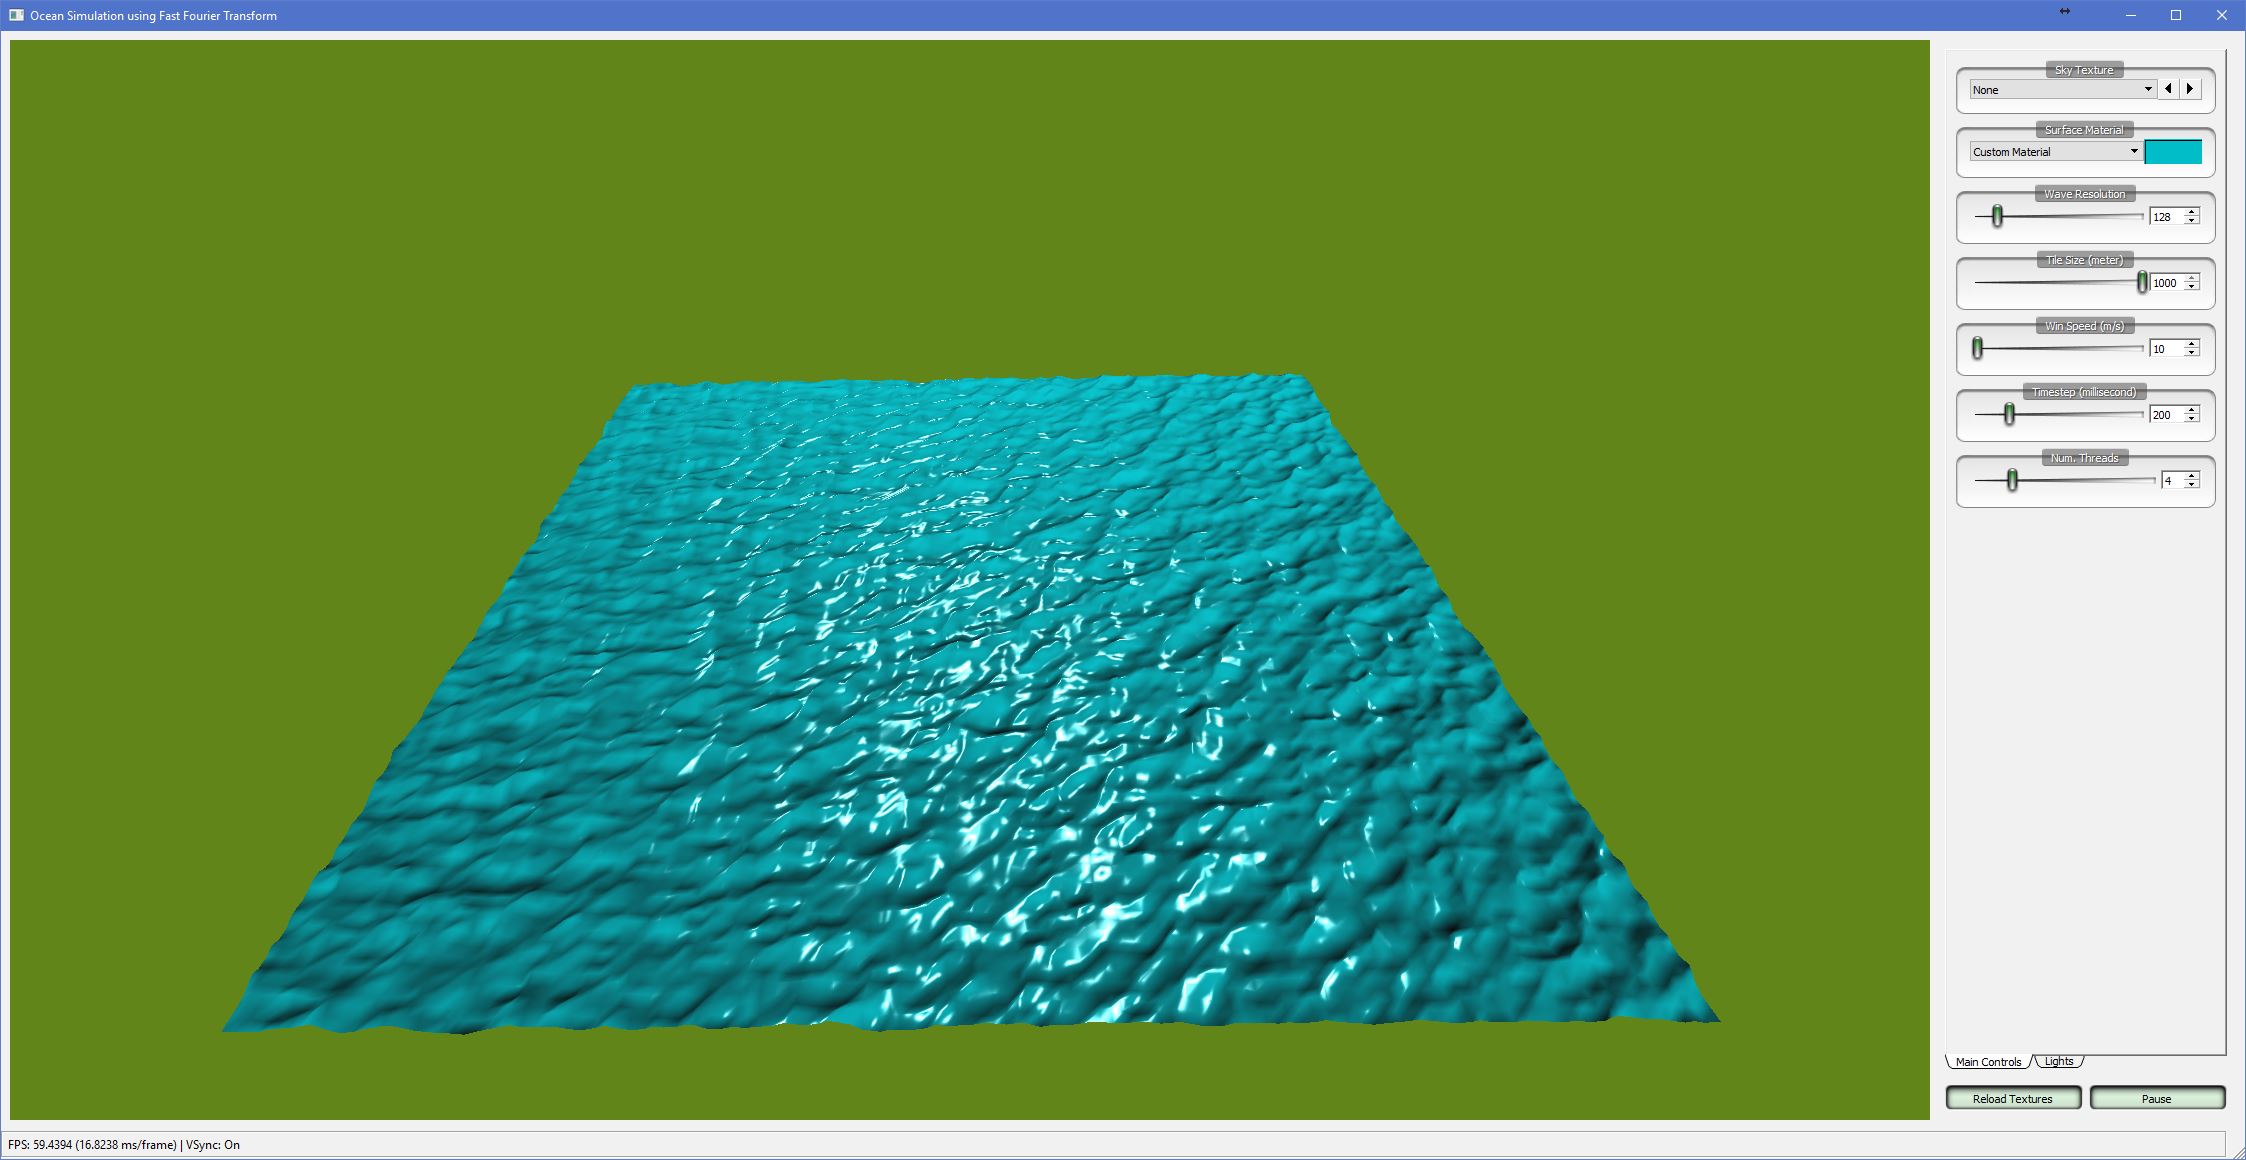 FFT-based Ocean Surface Simulation